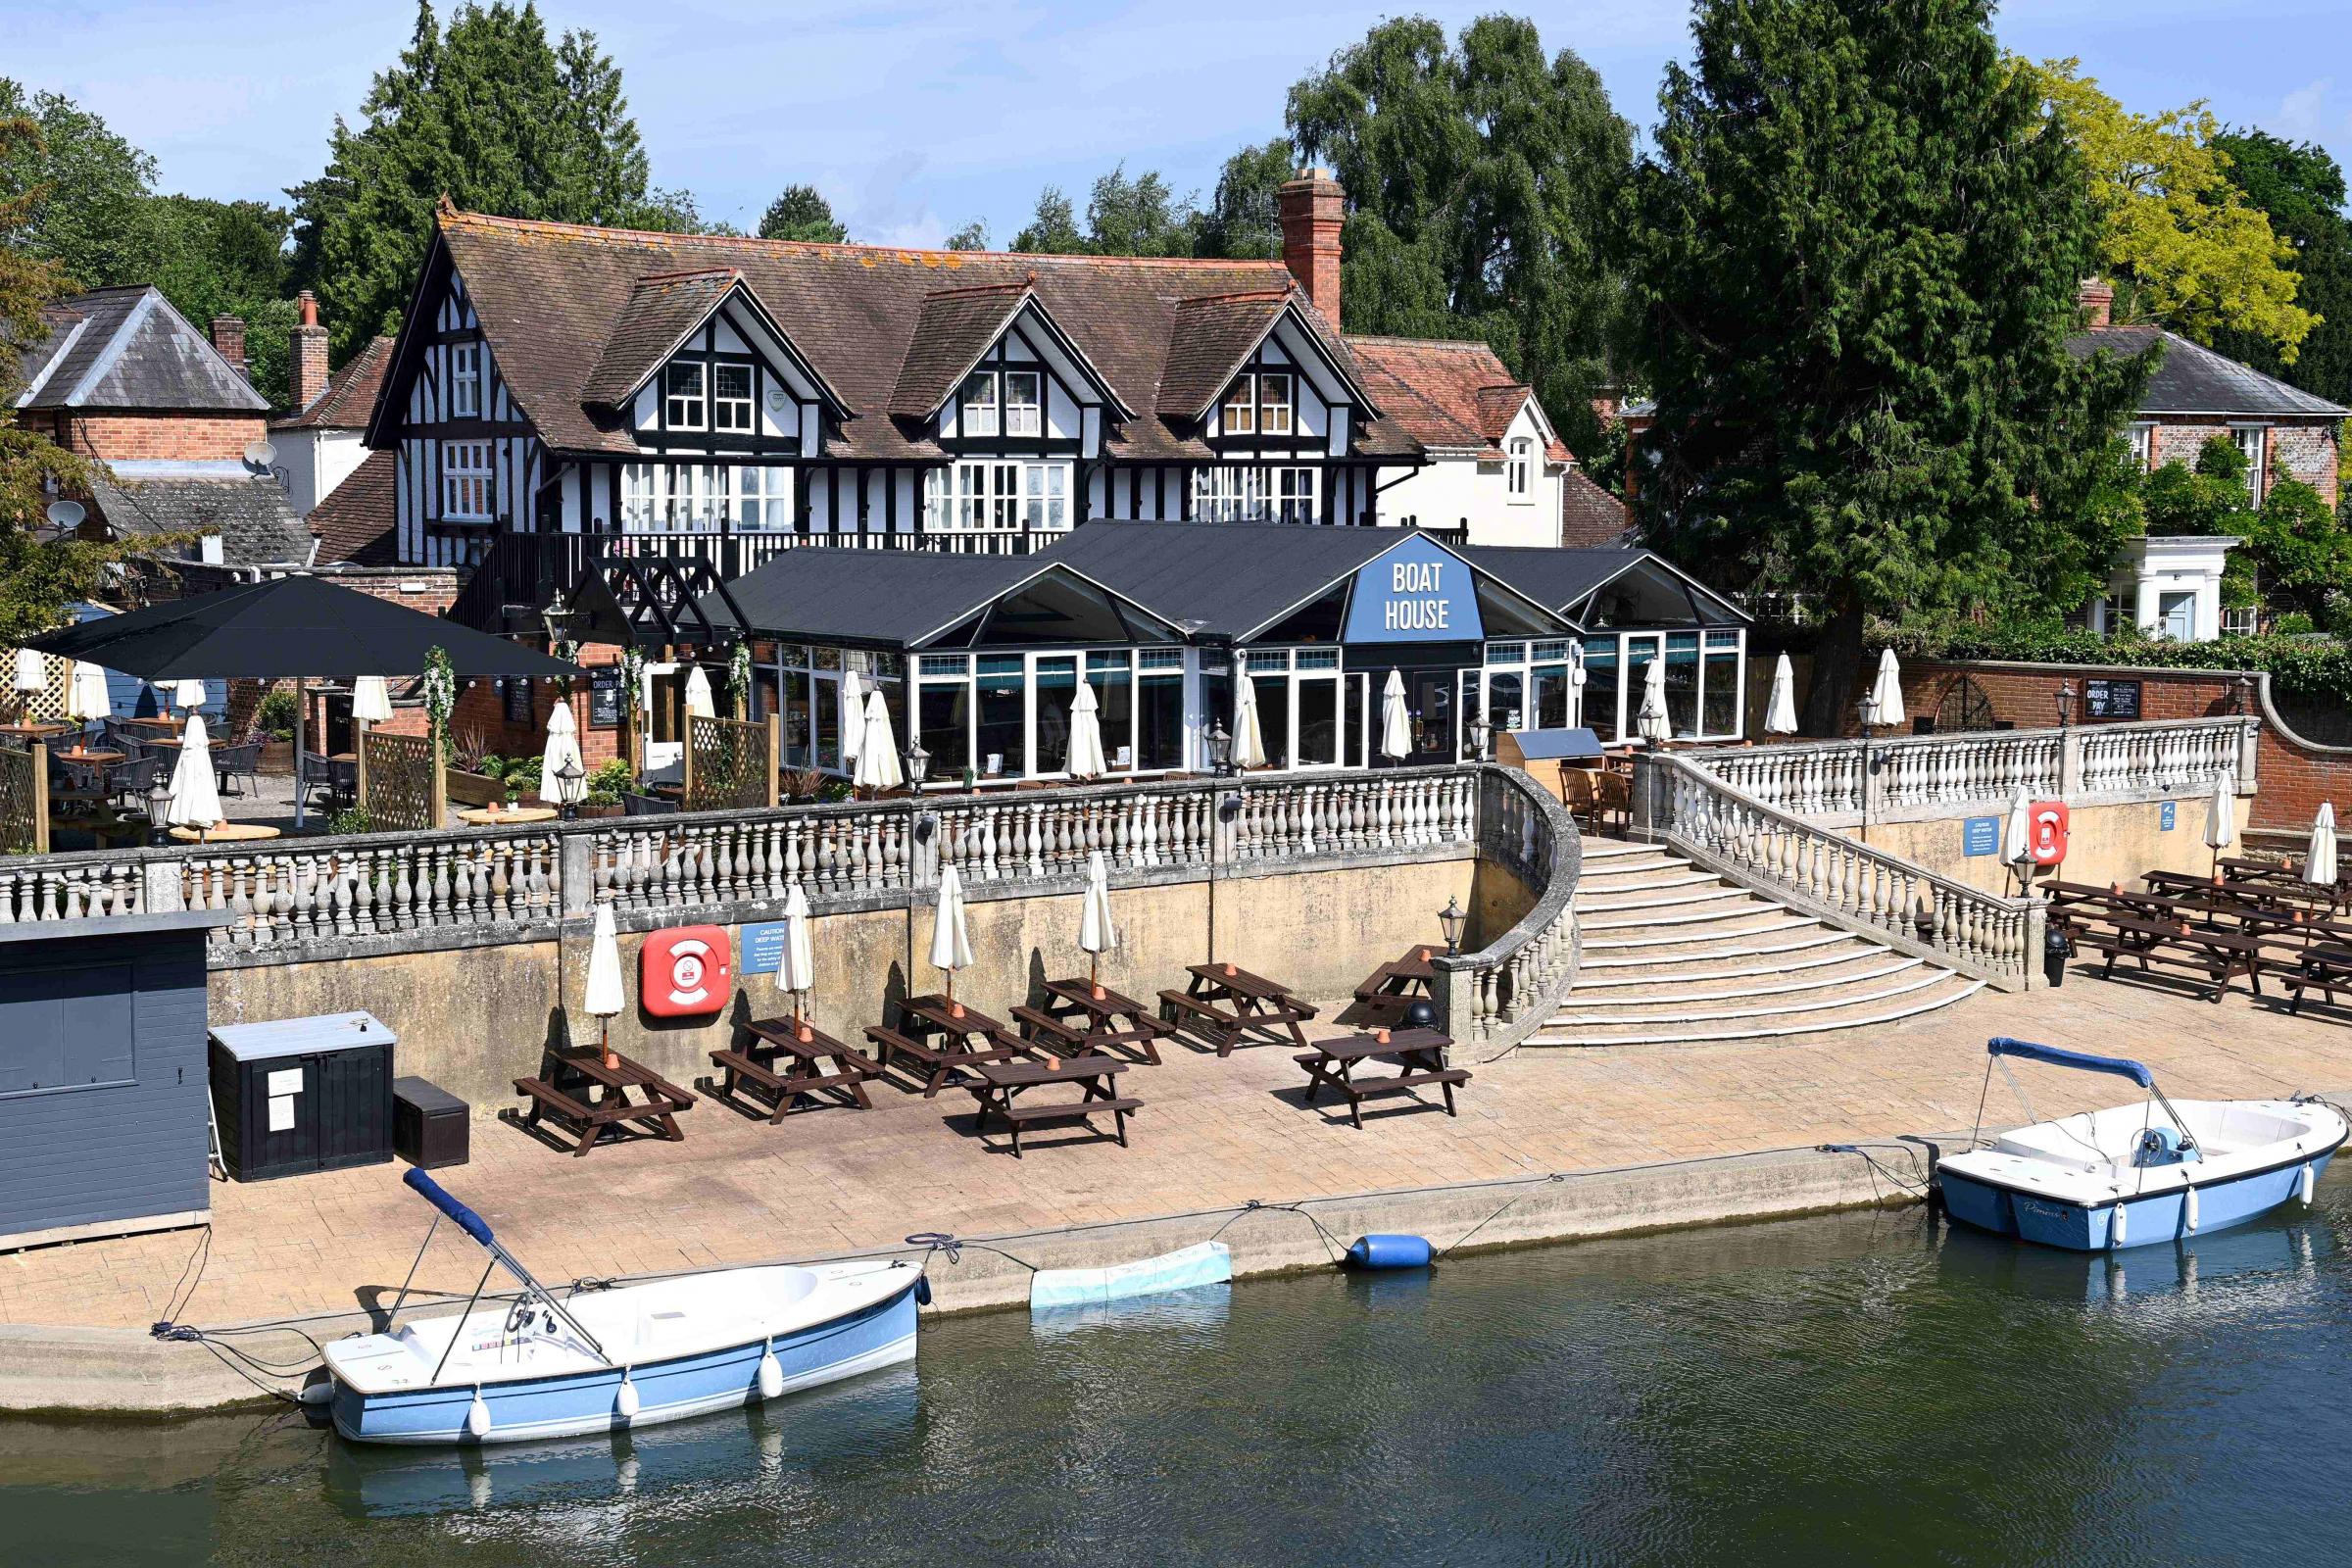 Oxfordshire pubs: Wallingford Boat House reopens post floods